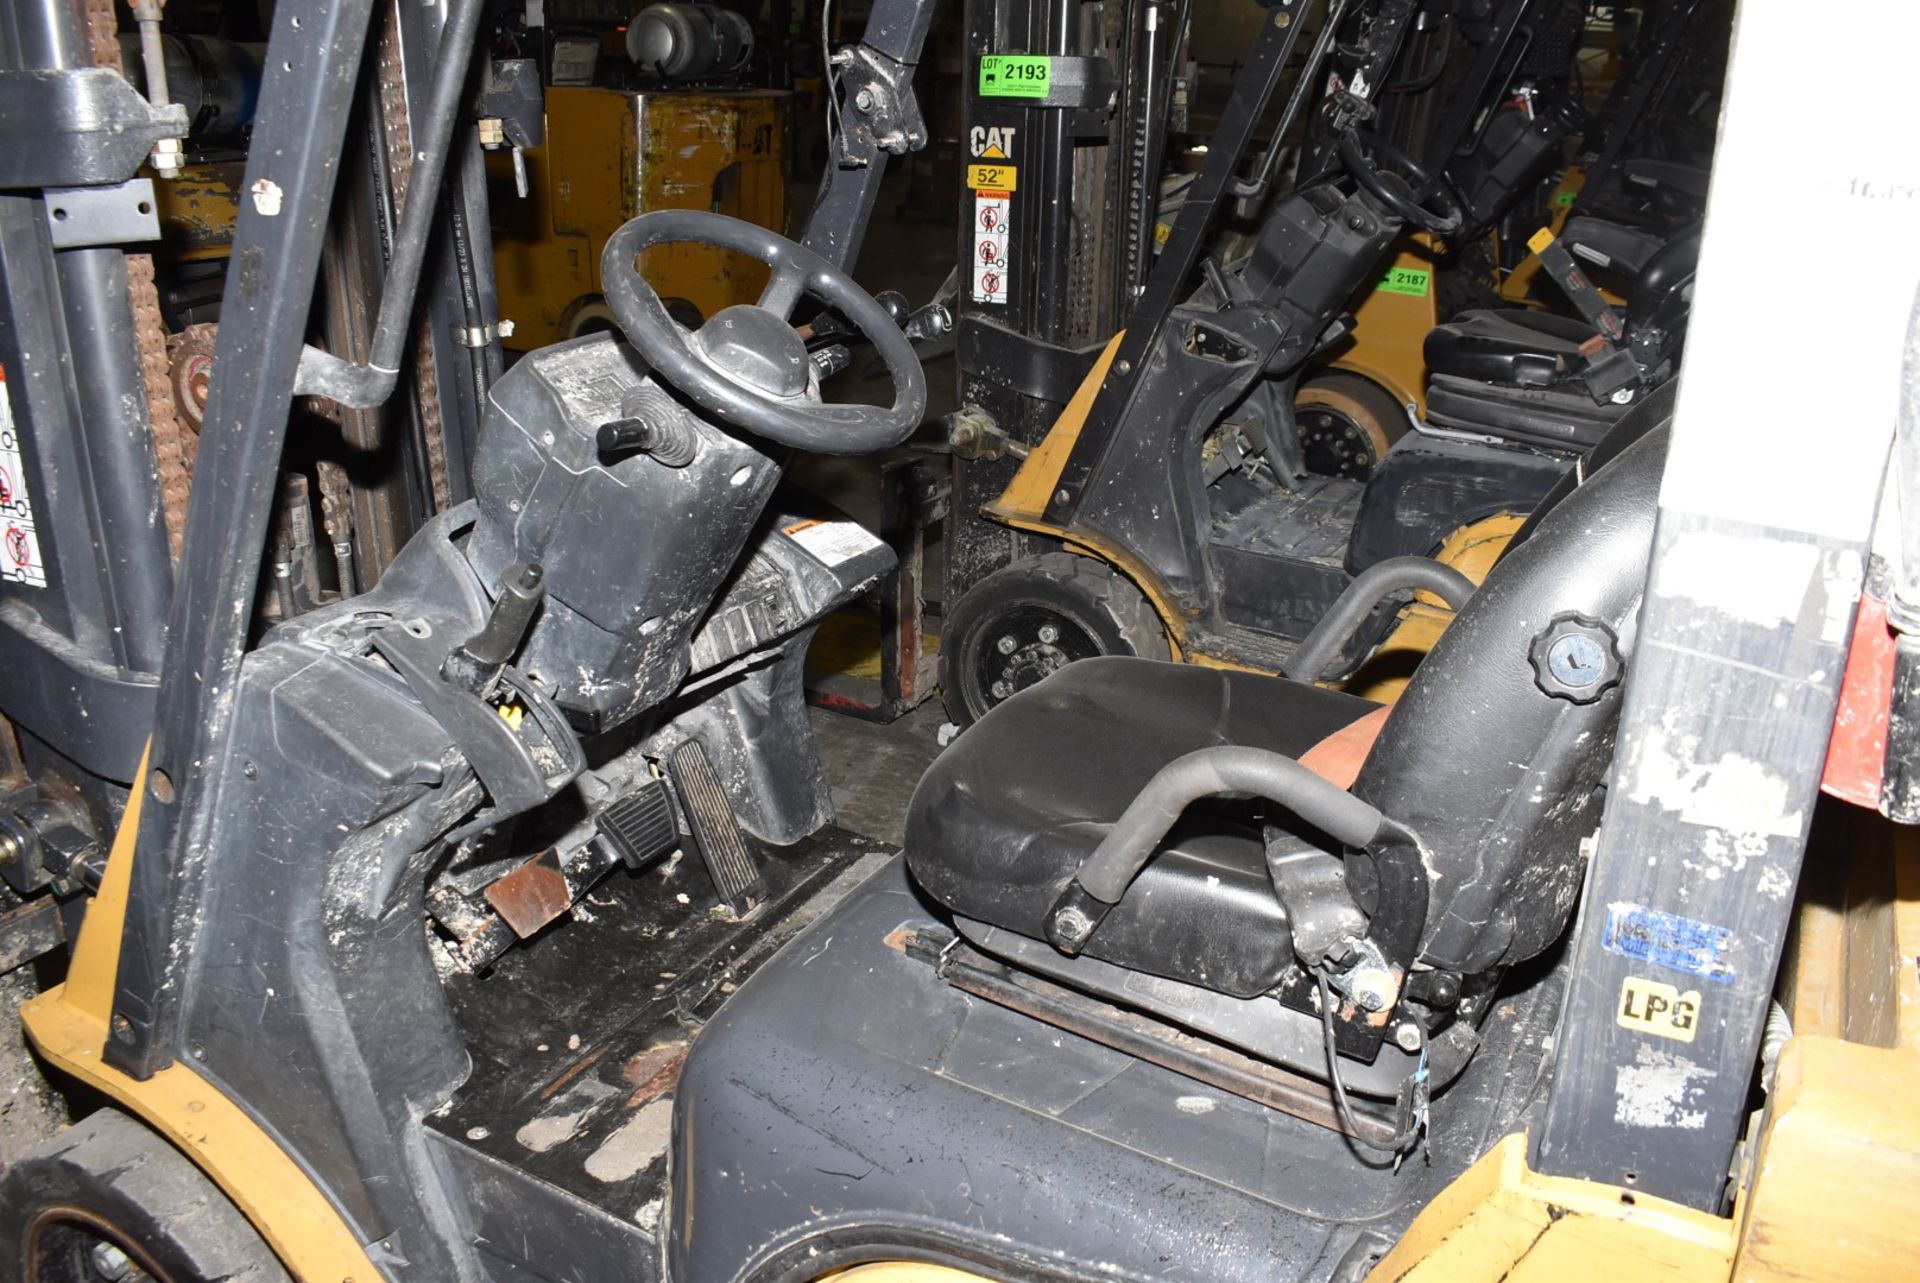 CATERPILLAR 2C6000 6,000 LBS. CAPACITY LPG FORKLIFT WITH 185" MAX VERTICAL REACH, 3-STAGE HIGH - Image 7 of 10